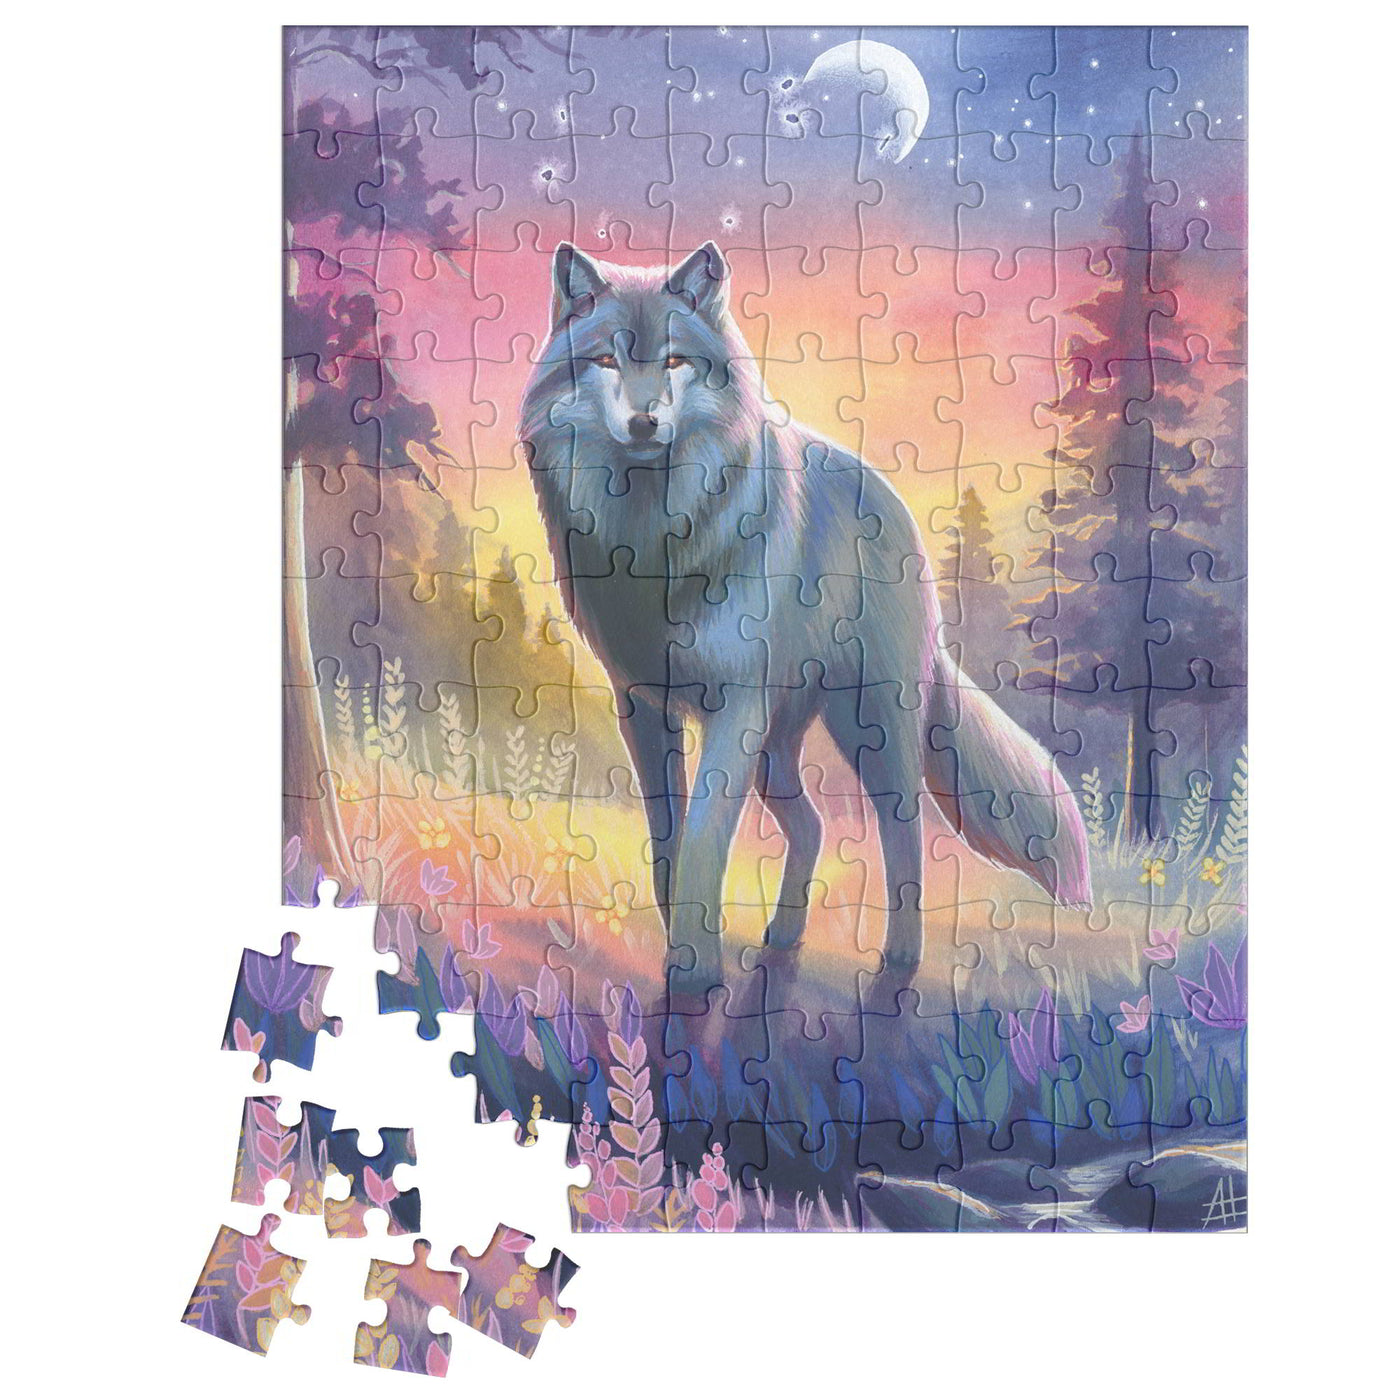 Wolf Puzzle with an image of a wolf standing in a colorful woodland at dusk, with a few puzzle pieces yet to be placed.